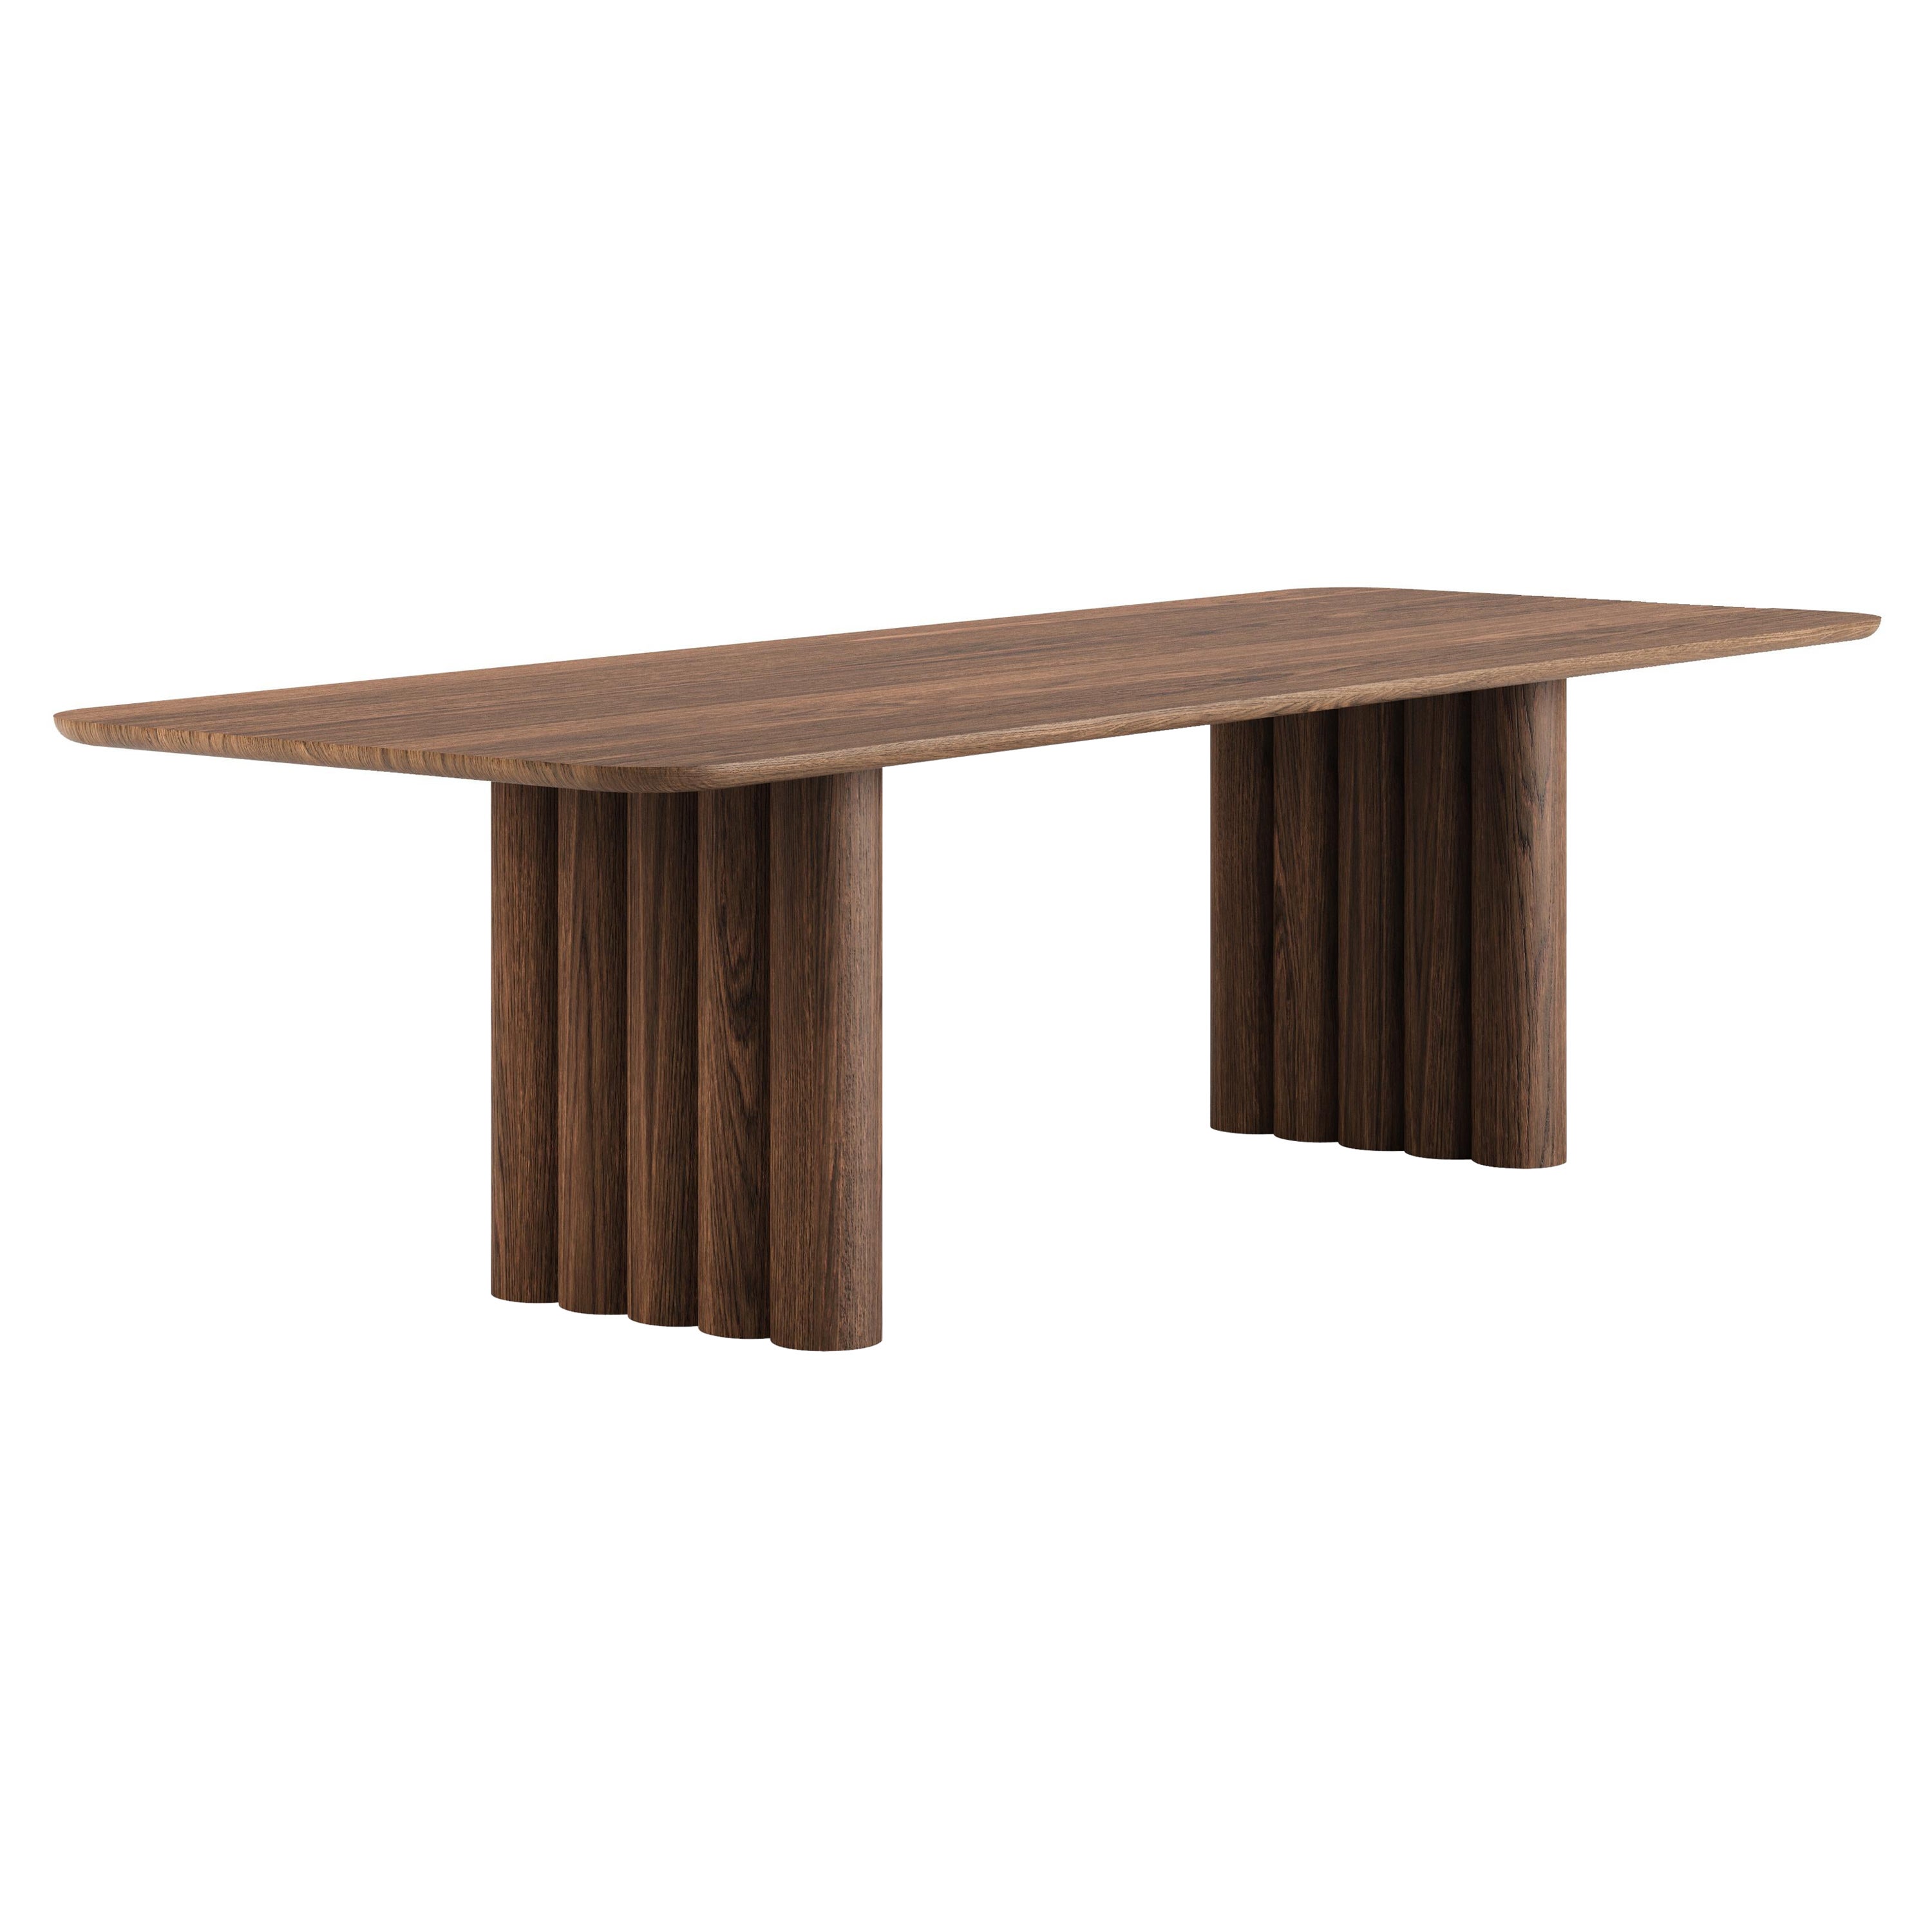 Contemporary Dining Table 'Plush' by Dk3, Smoked Oak or Walnut, 300, Rectangular For Sale